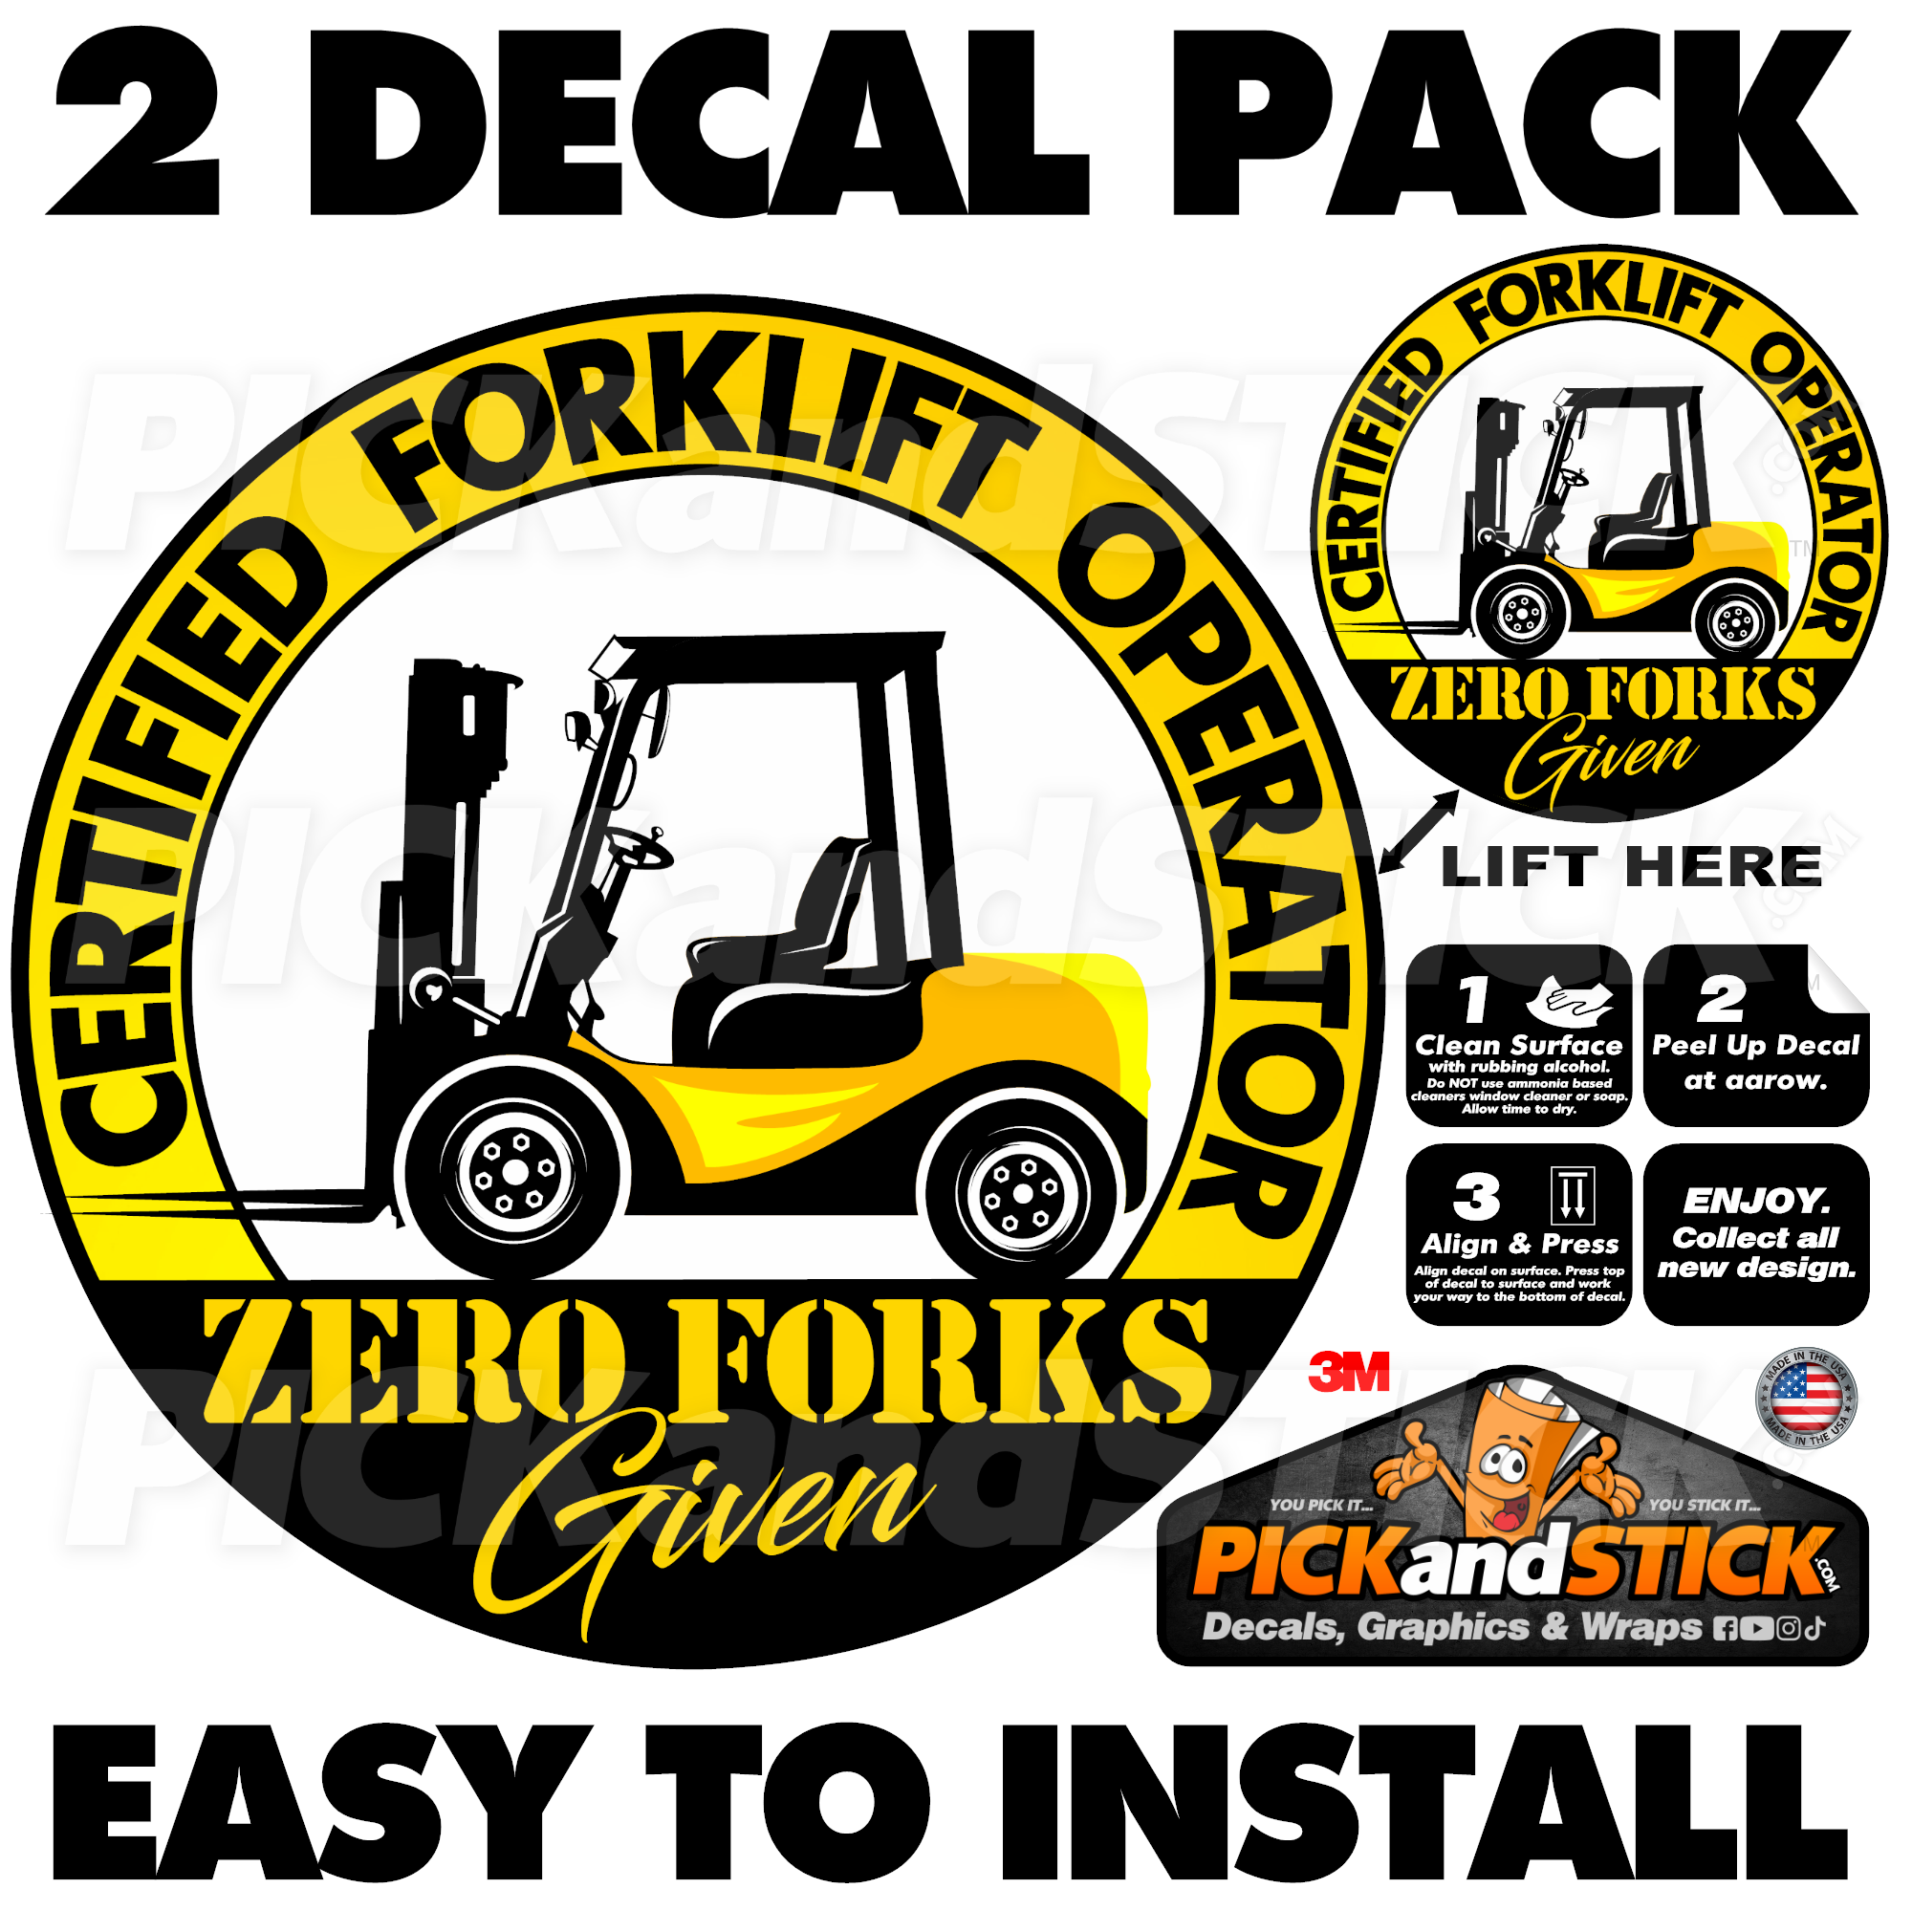 Certified Forklift Operator "Zero Forks Given" - 2 Decal Pack